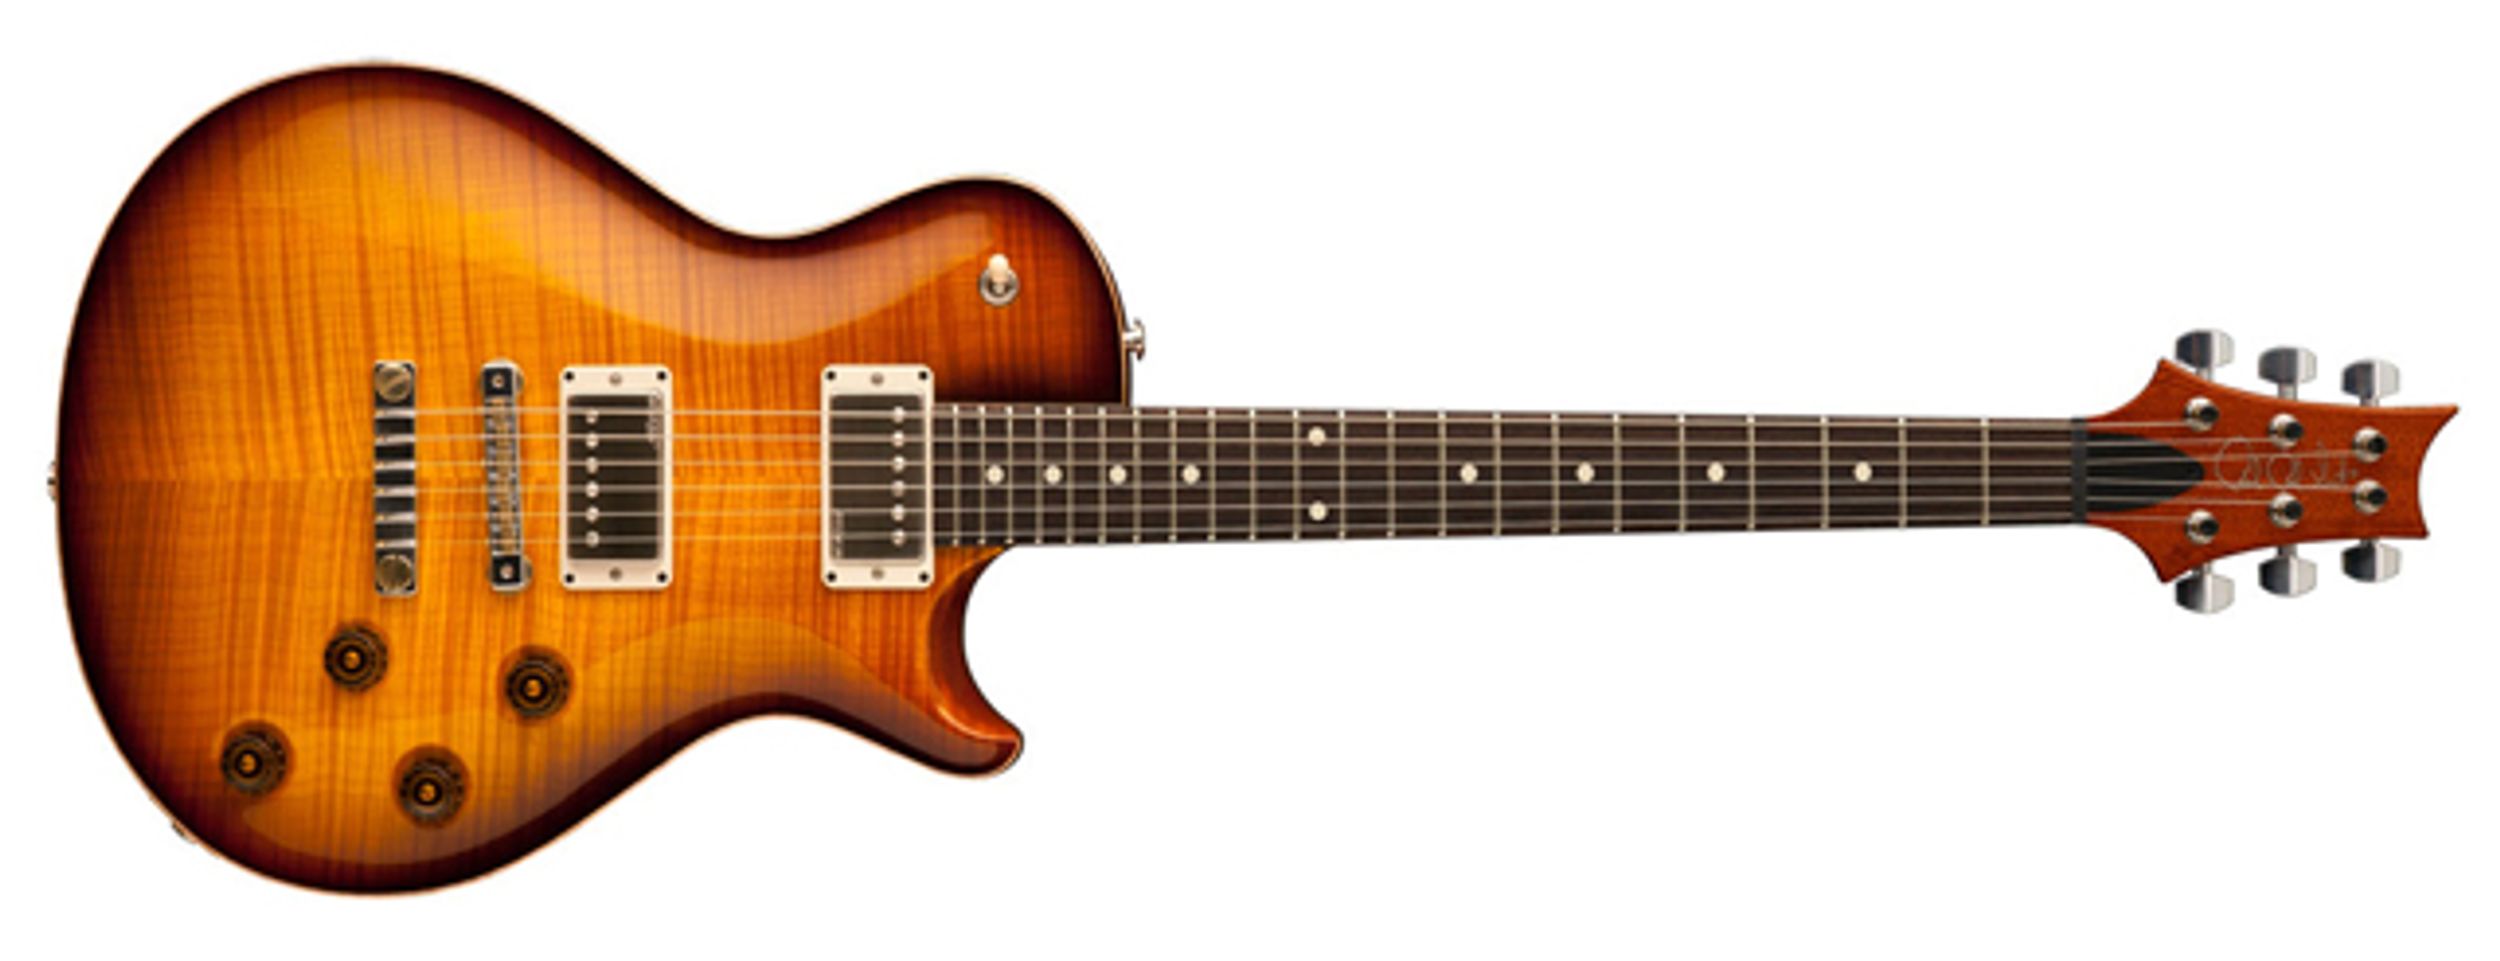 PRS Guitars Introduces New “Stripped” 58 Model